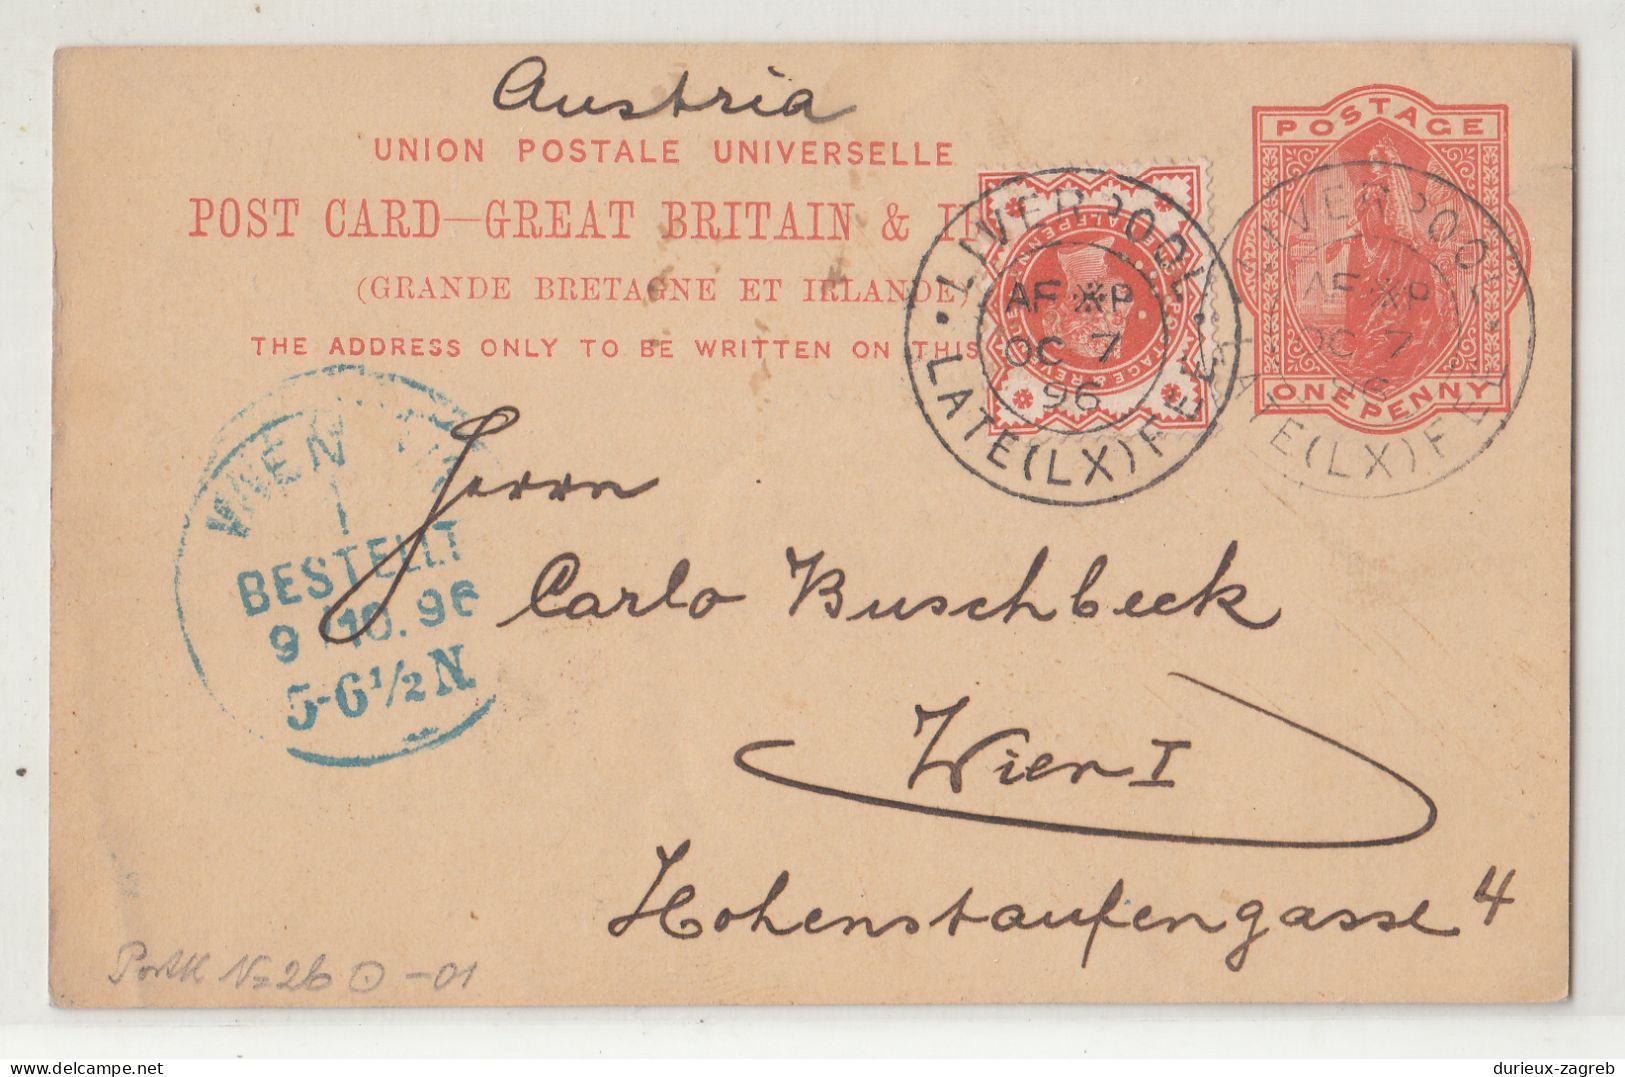 Gruning & Co., Liverpool Company Preprinted Postal Stationery Postcard Posted 1896 To Wien - Uprated B240401 - Entiers Postaux